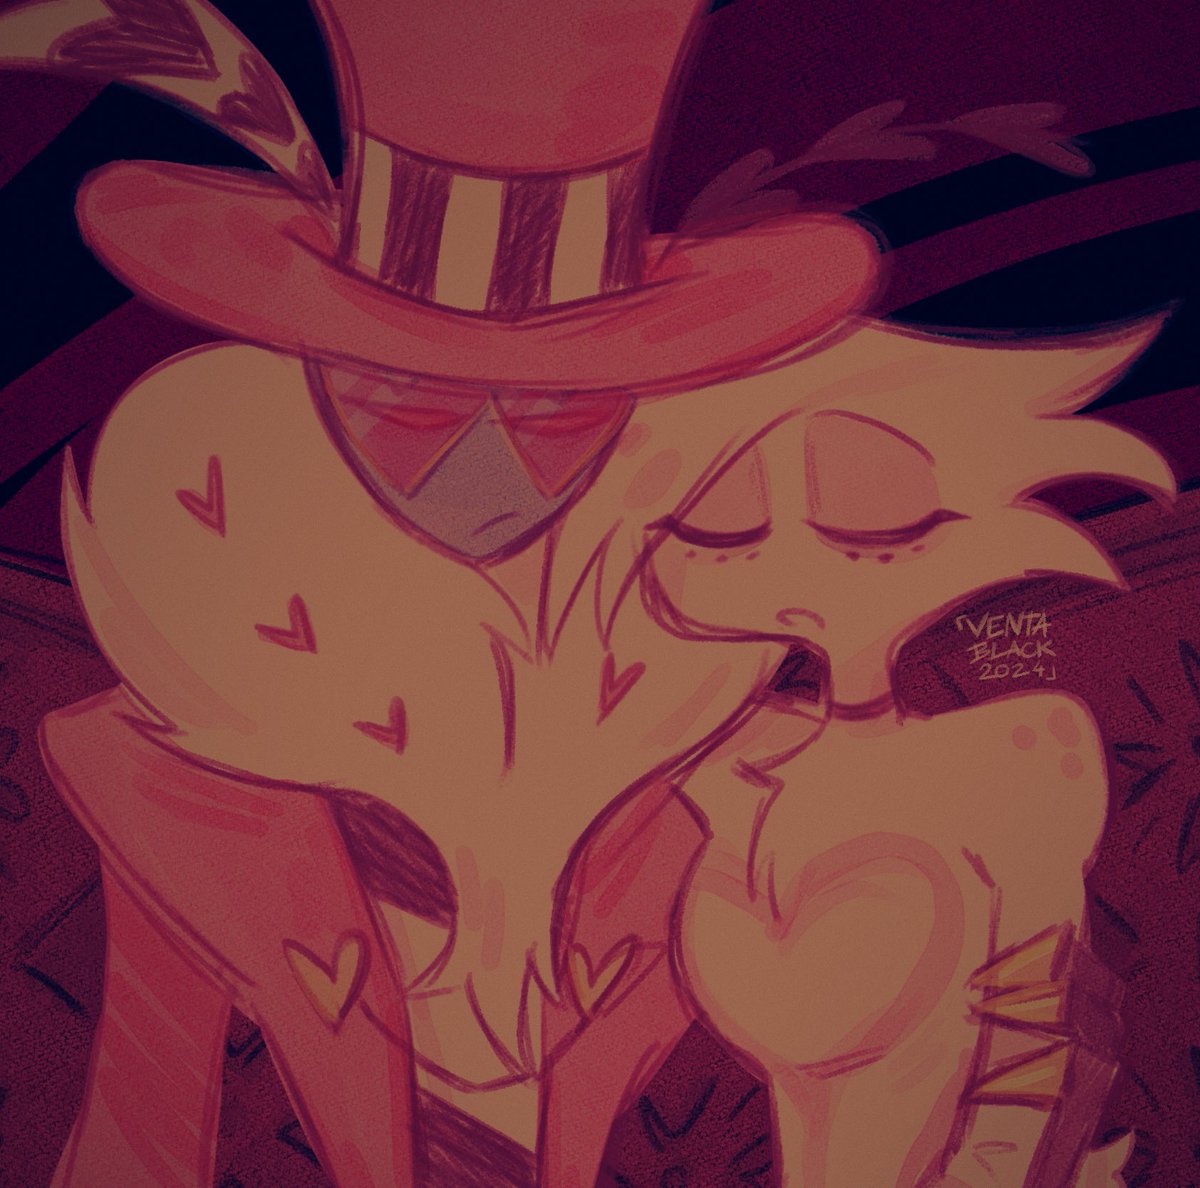 CW // valangel

i edged you guys for long enough, heres the valentino and angel dust doodle i did due to boredom ... 🌷 #hazbinhotel